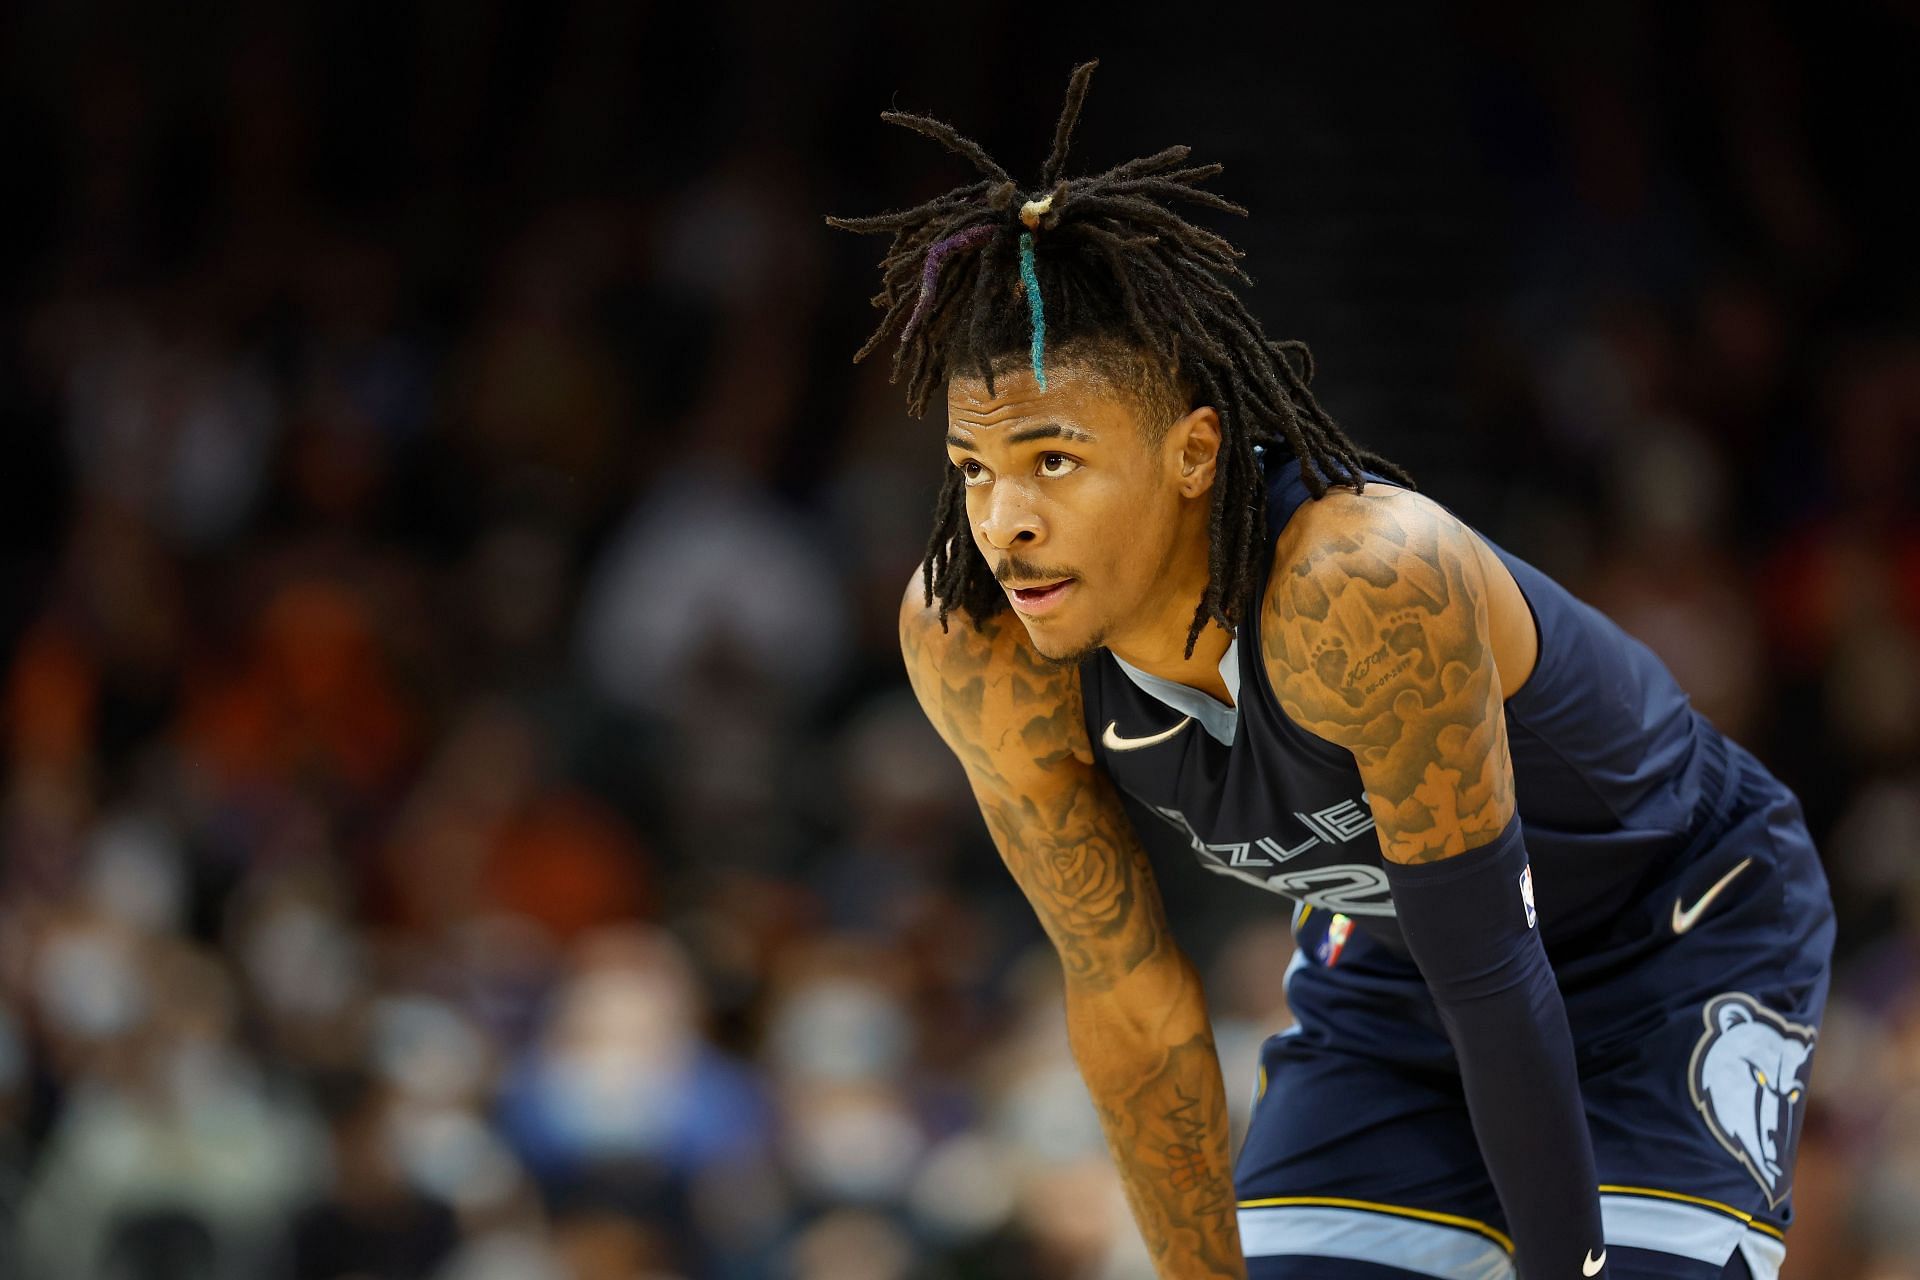 Watch: Ja Morant hits an unreal buzzer-beater at the end of halftime during the Grizzlies-Spurs game 